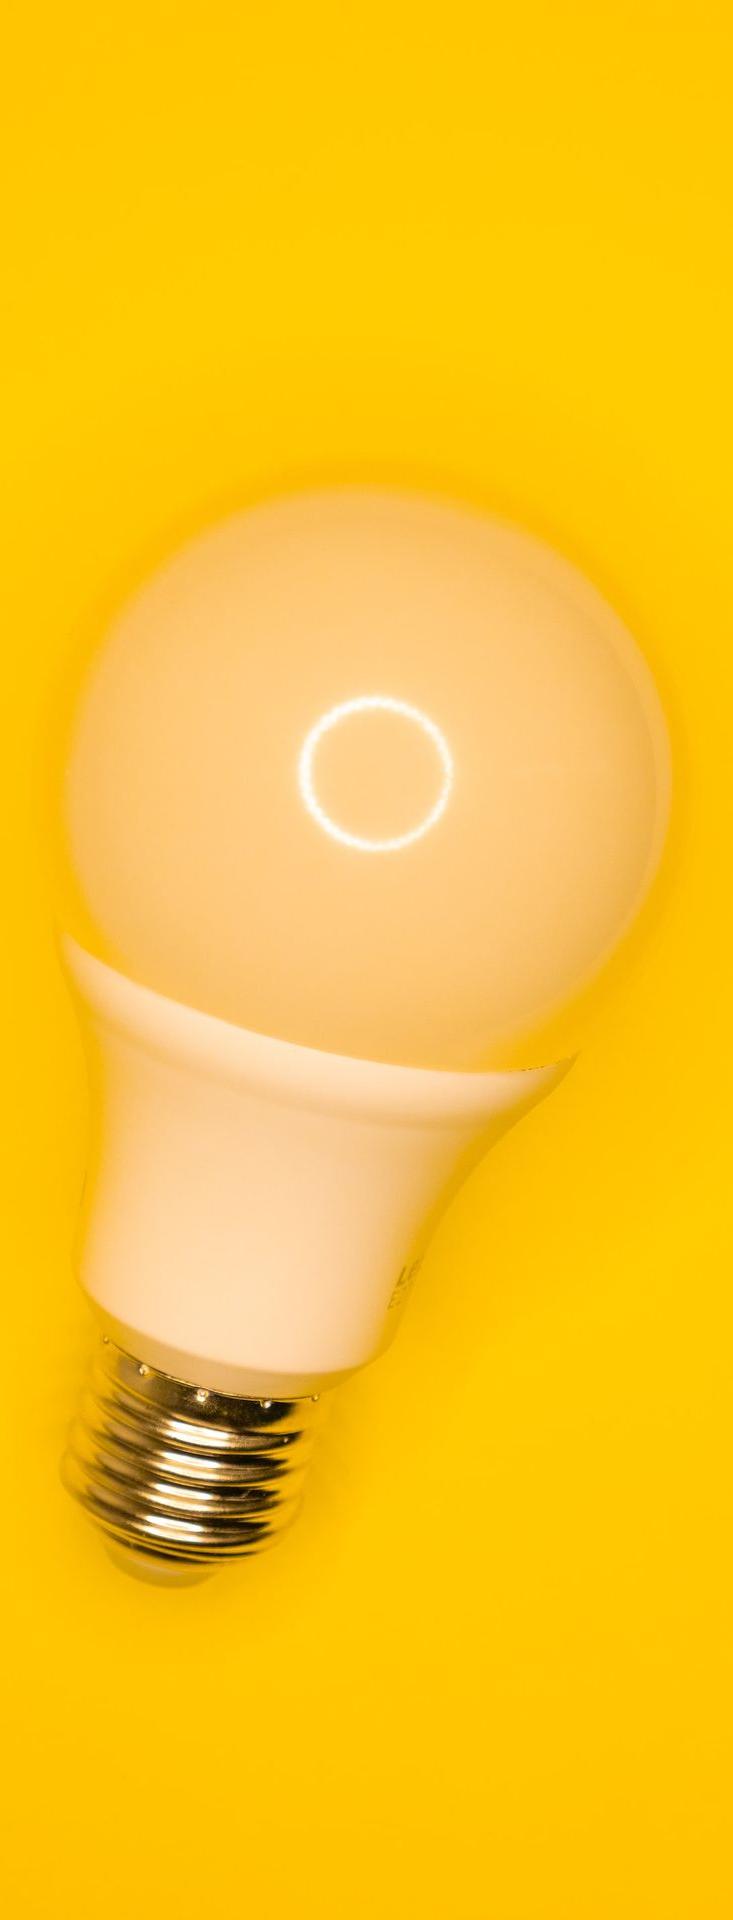 white light bulb on yellow surface